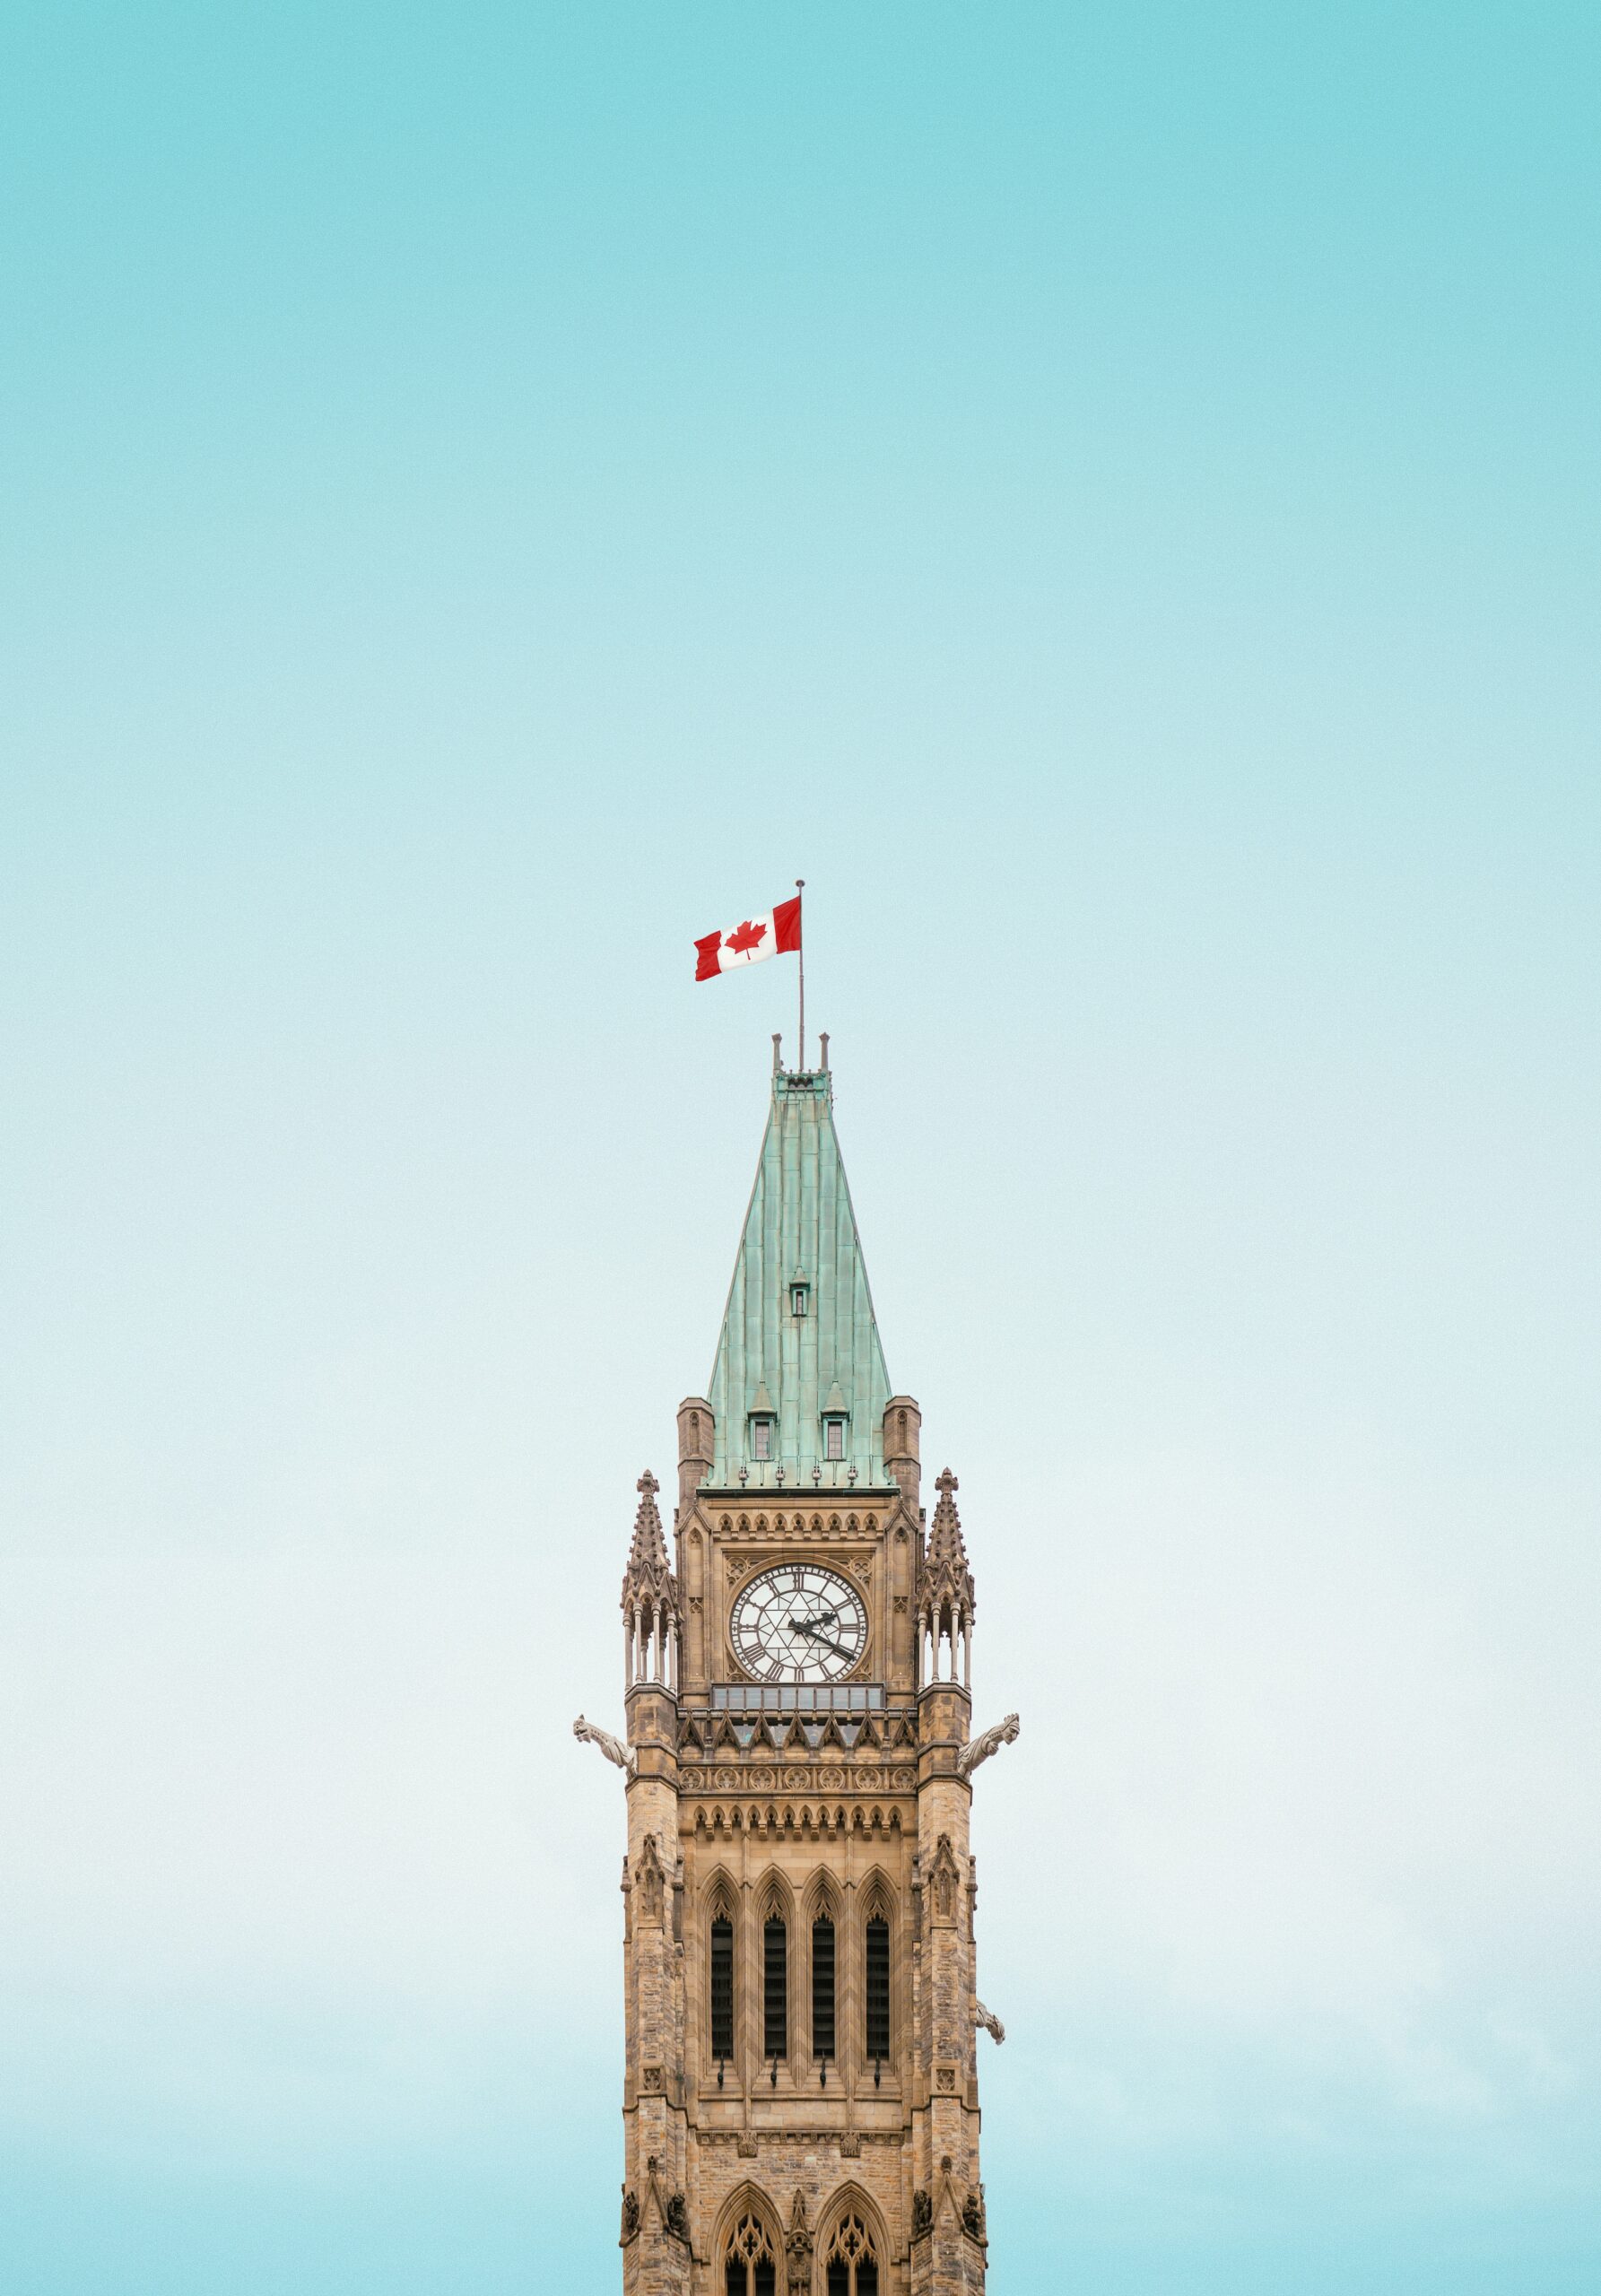 Canadian Immigration policies and requirements